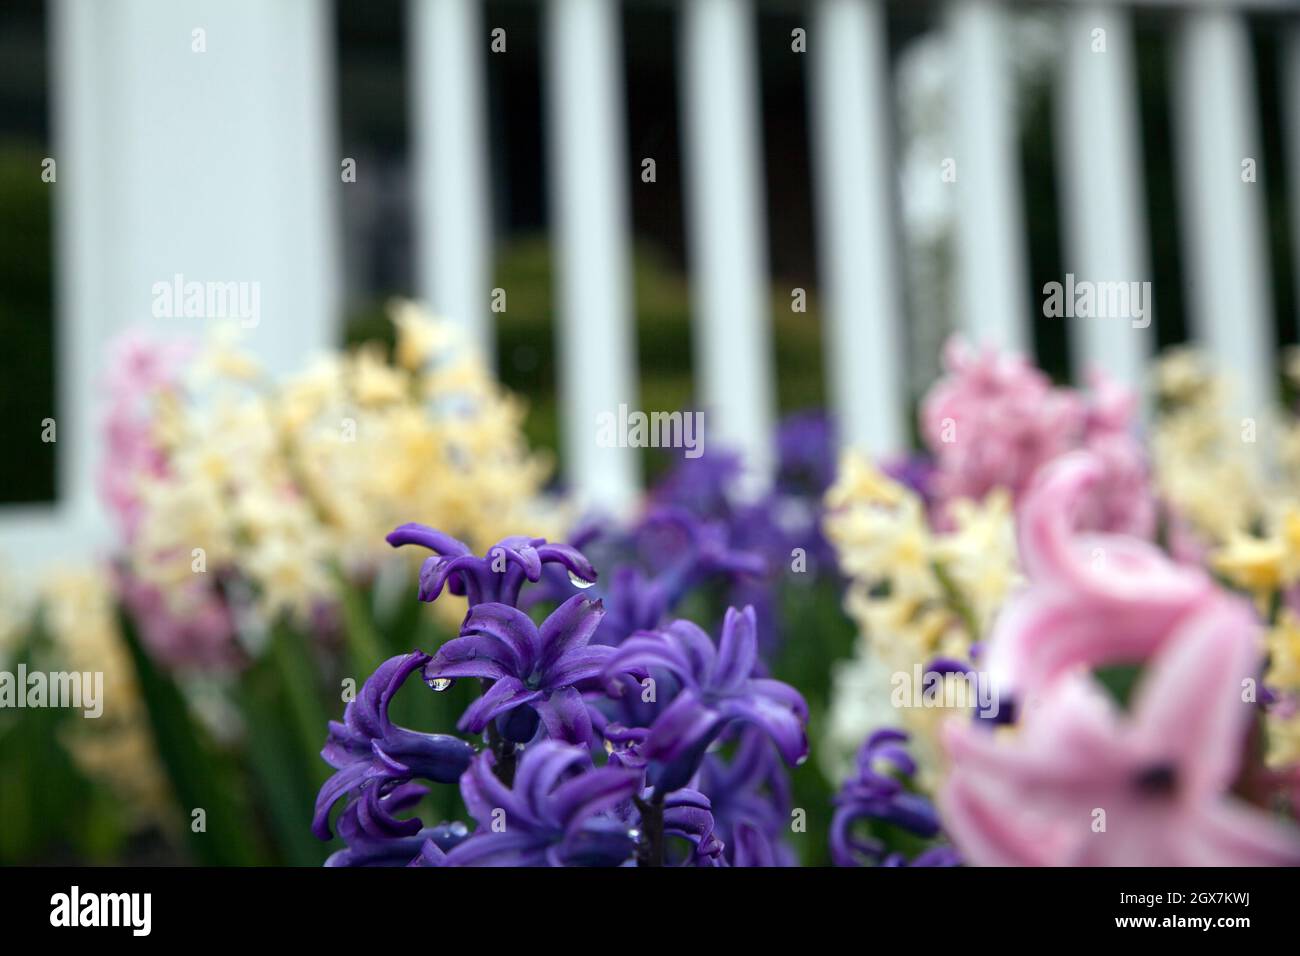 Bed of hyacinths in front yard of Massachusetts home with white picket fence. Stock Photo